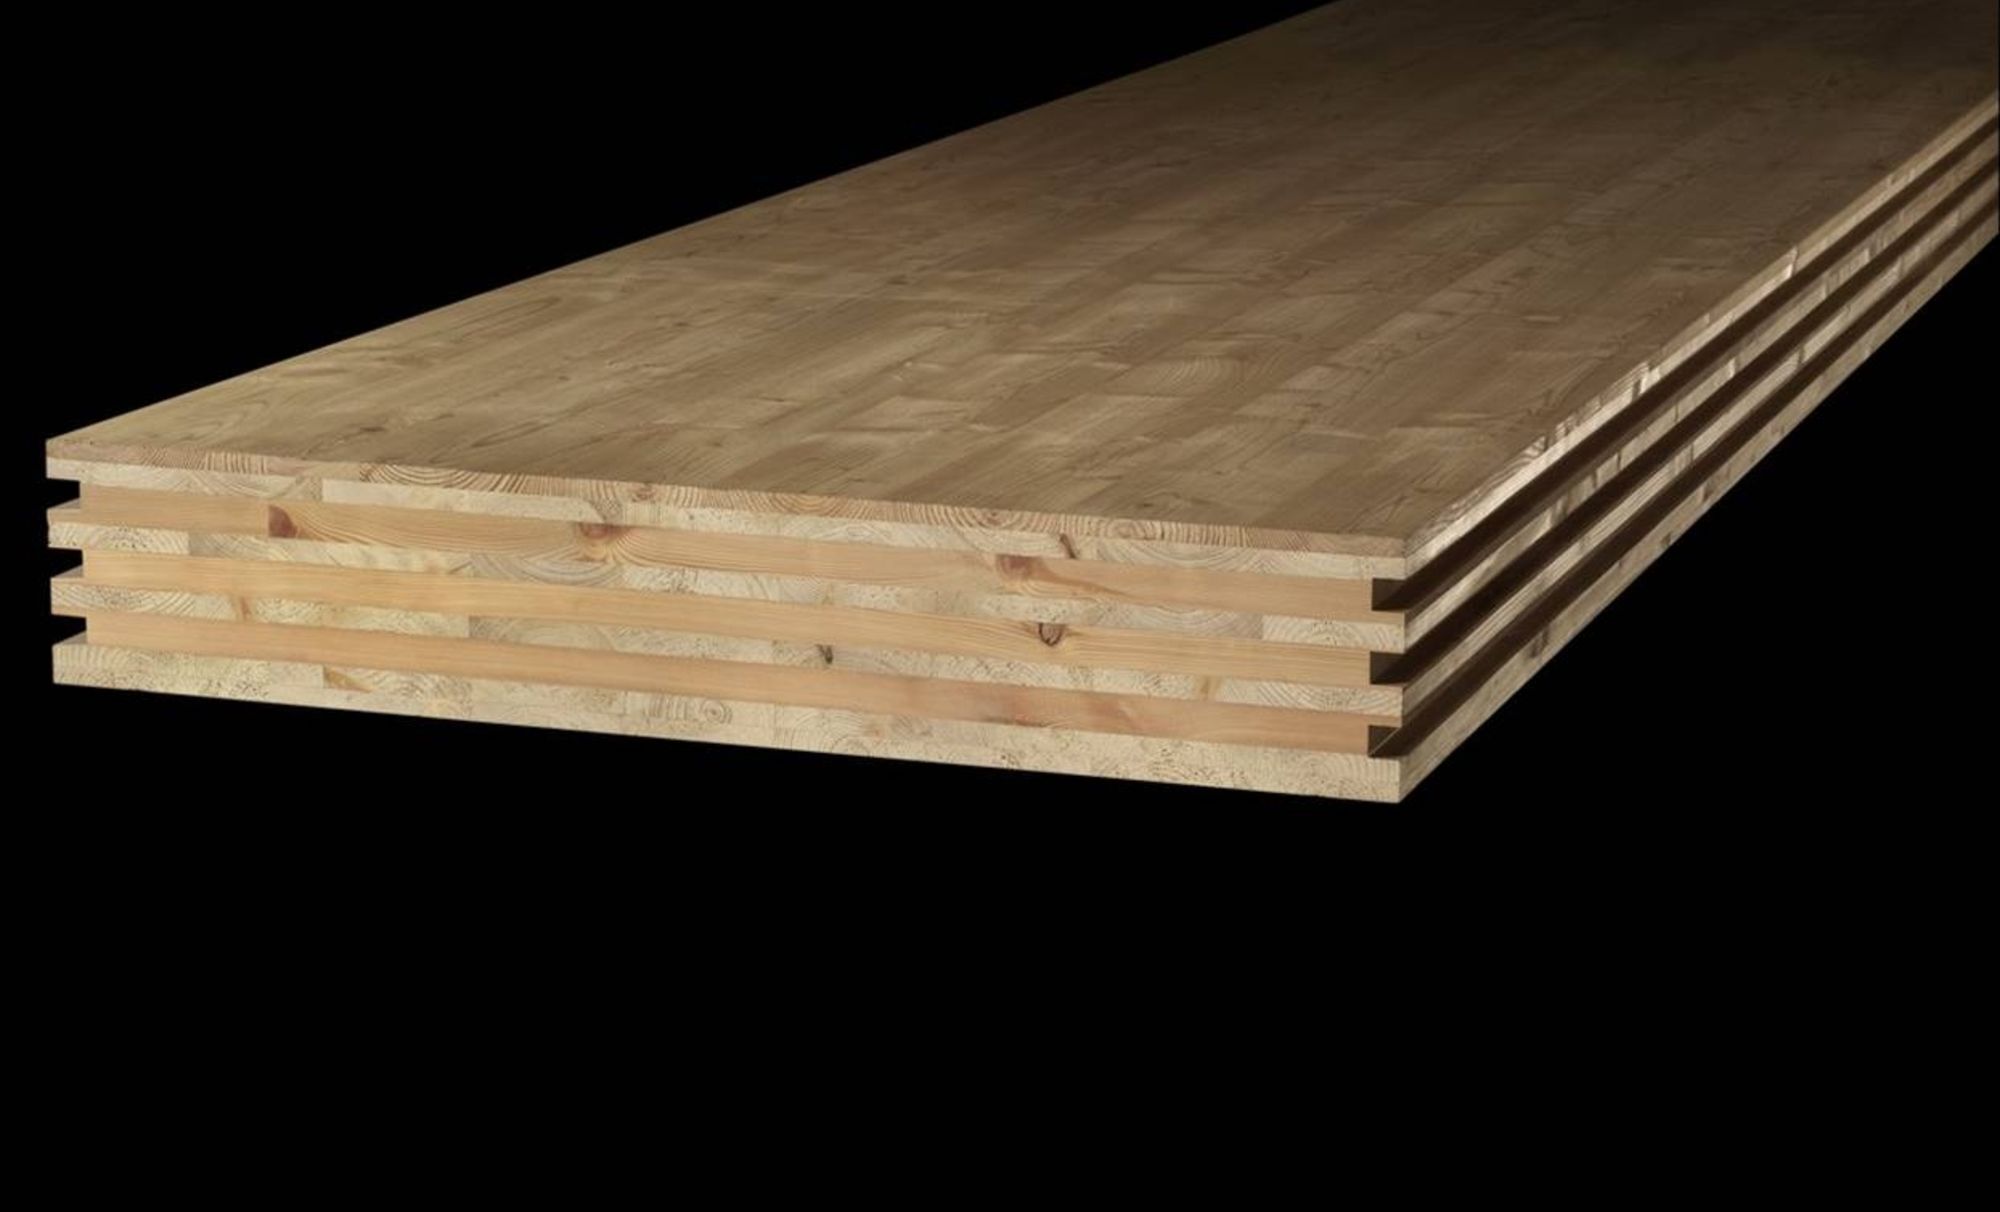 CLT - Cross Laminated Timber -> SCS specialises in Supply, Installation